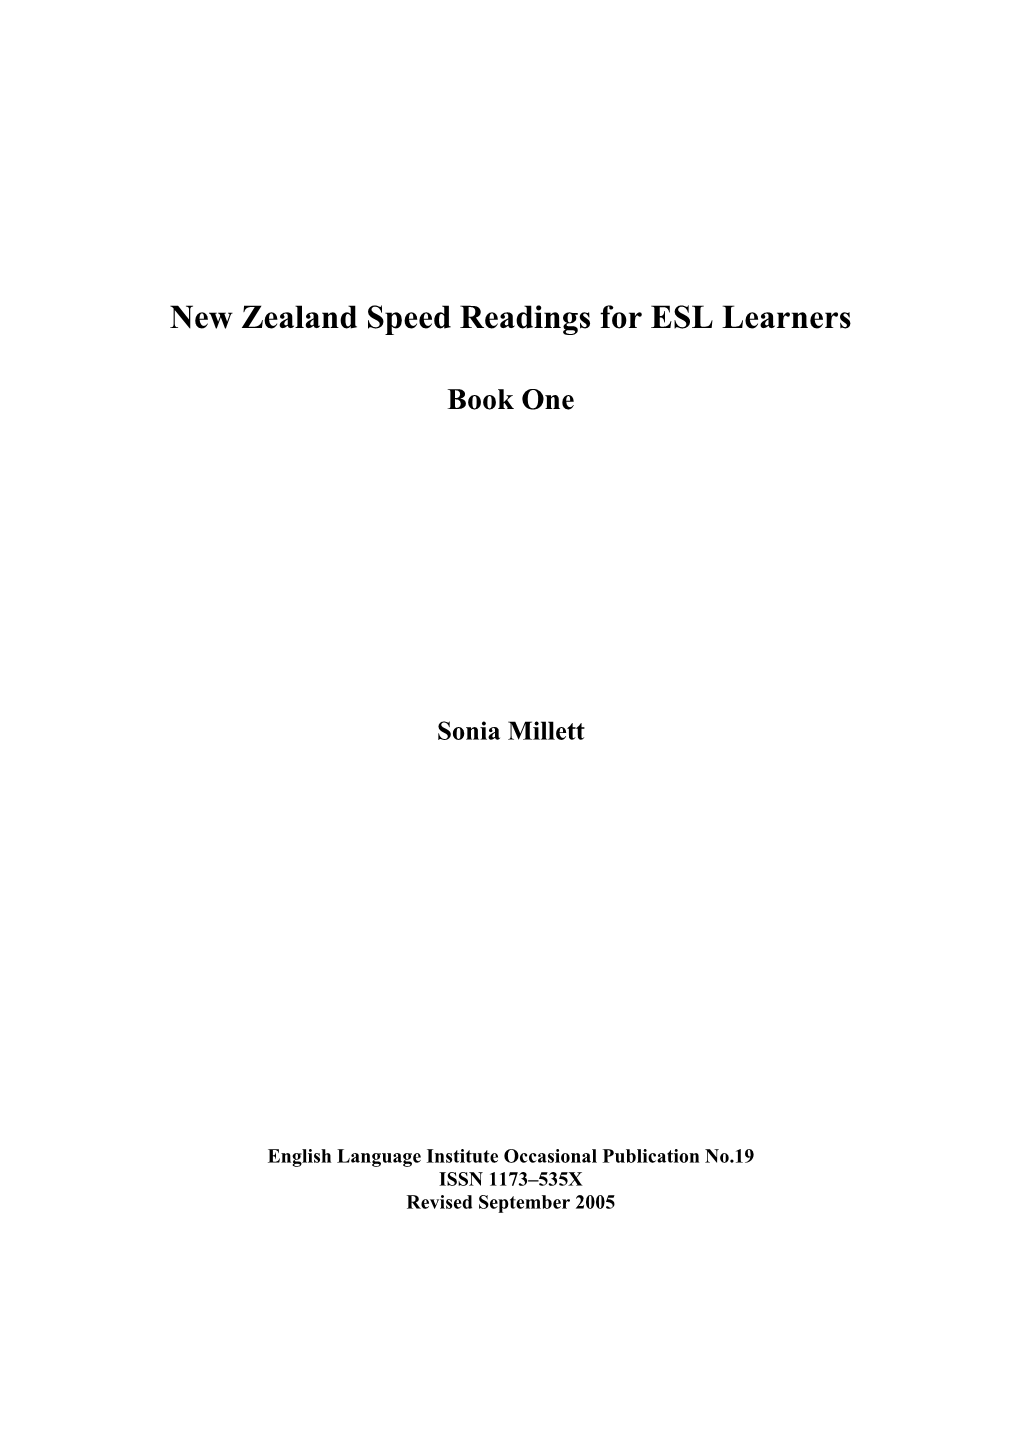 New Zealand Speed Readings for ESL Learners